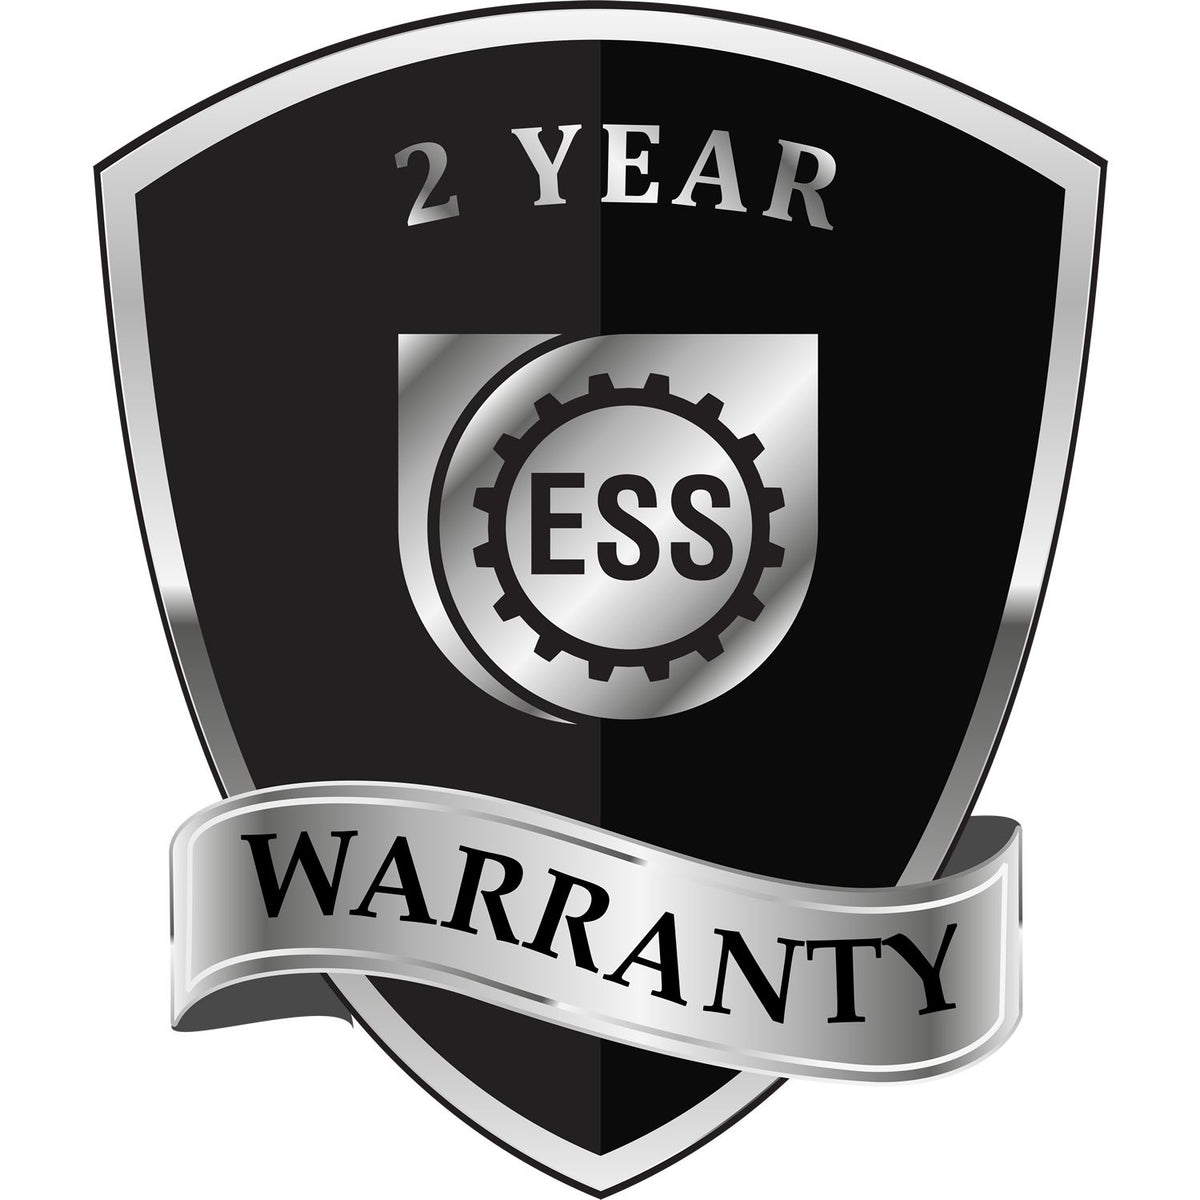 A badge or emblem showing a warranty icon for the Soft Hawaii Professional Engineer Seal